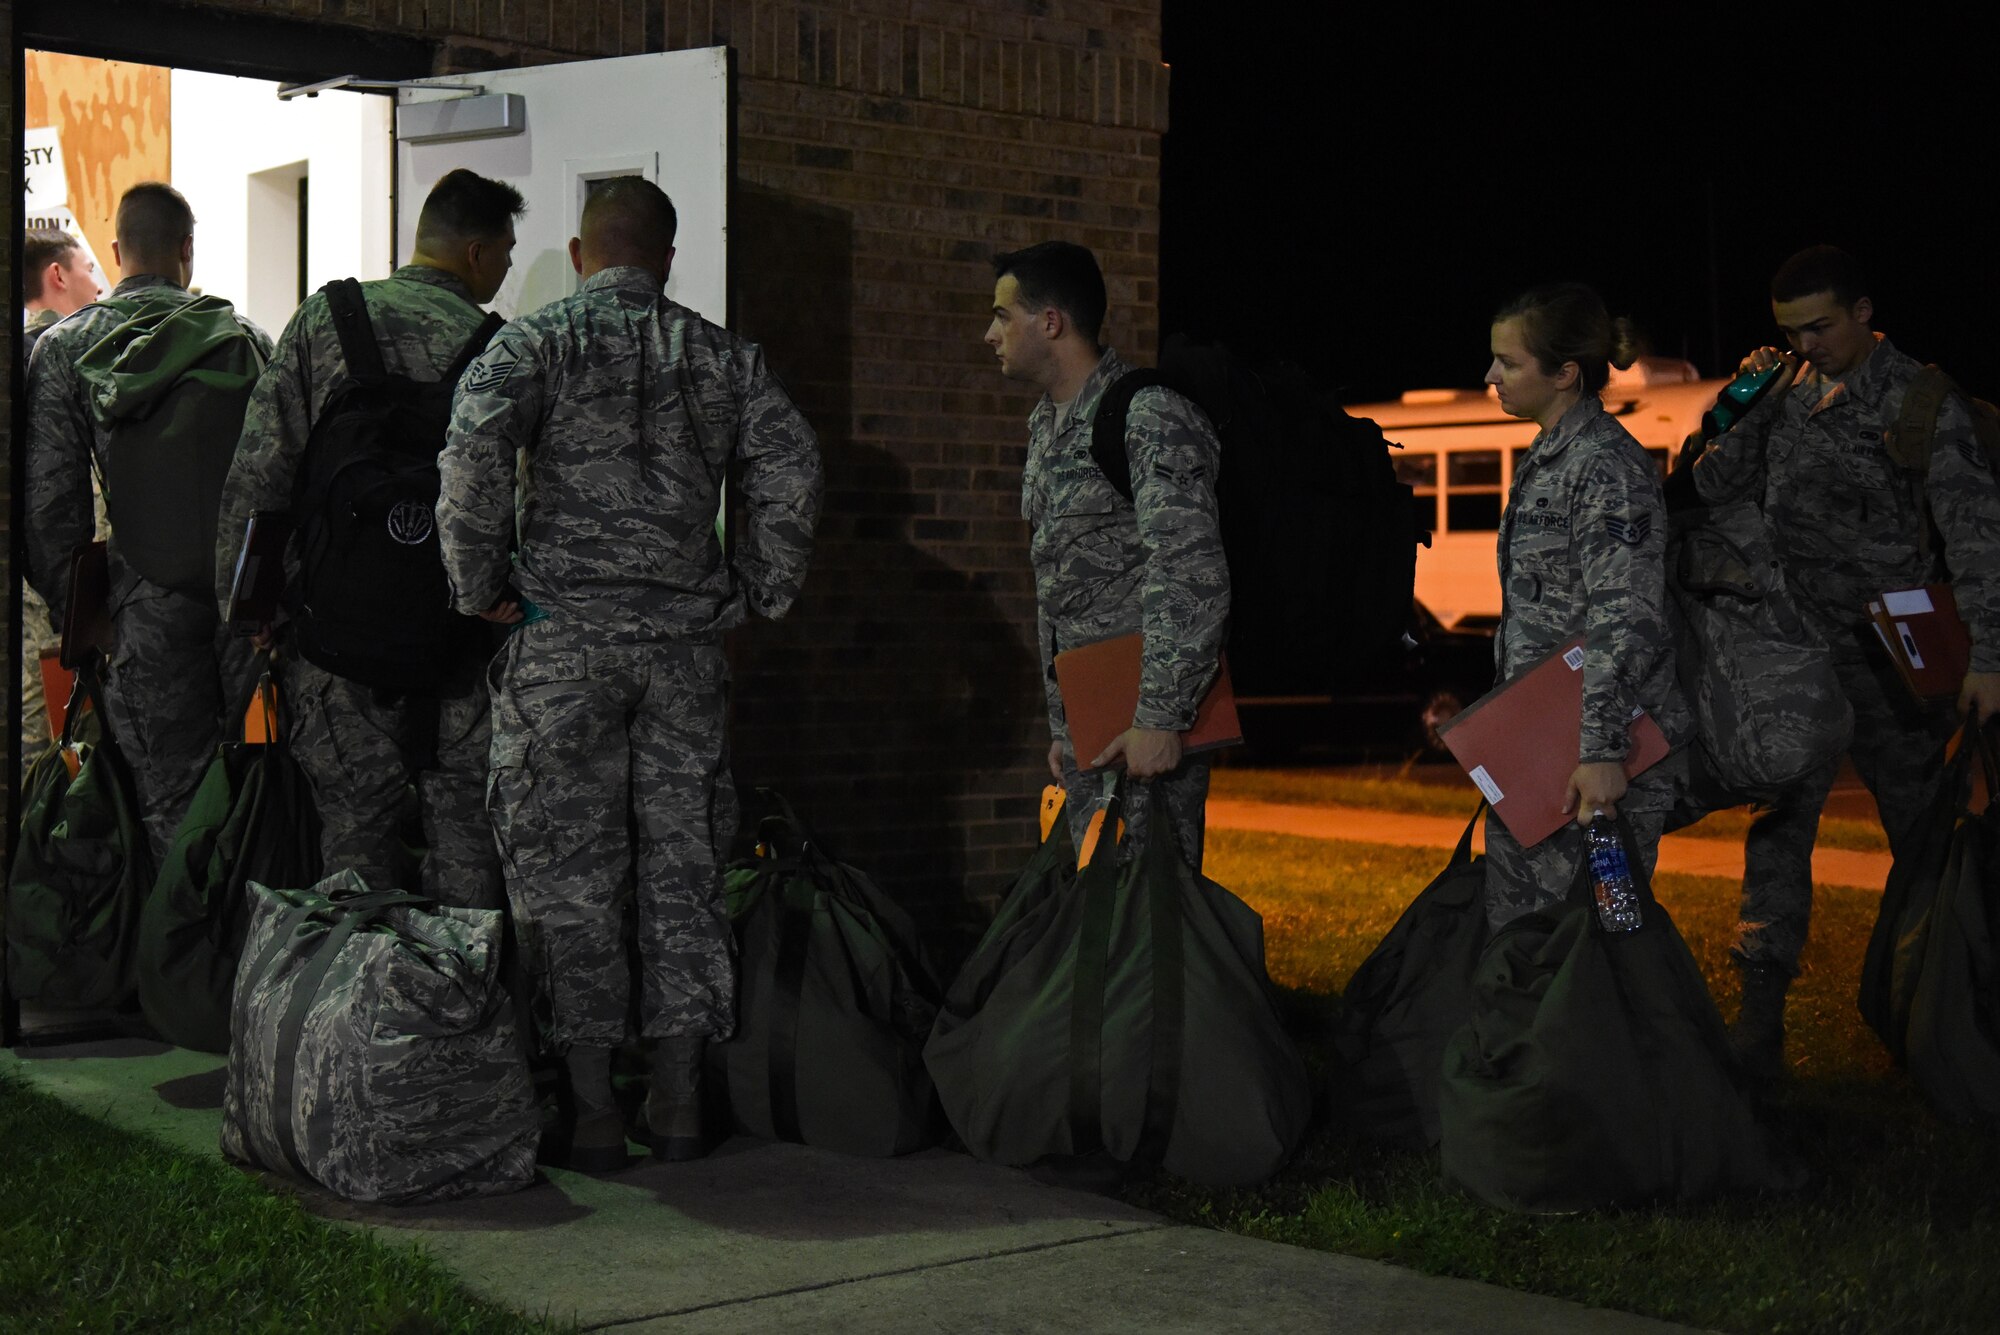 Team Seymour Airmen carry their deployment bags to the pre-deployment function processing center during Exercise Thunderdome 17-02, July 20, 2017, at Seymour Johnson Air Force Base, North Carolina. Seymour Johnson AFB members simulate deployments and other major events to test and improve readiness and capabilities. (U.S. Air Force photo by Senior Airman Ashley Maldonado)